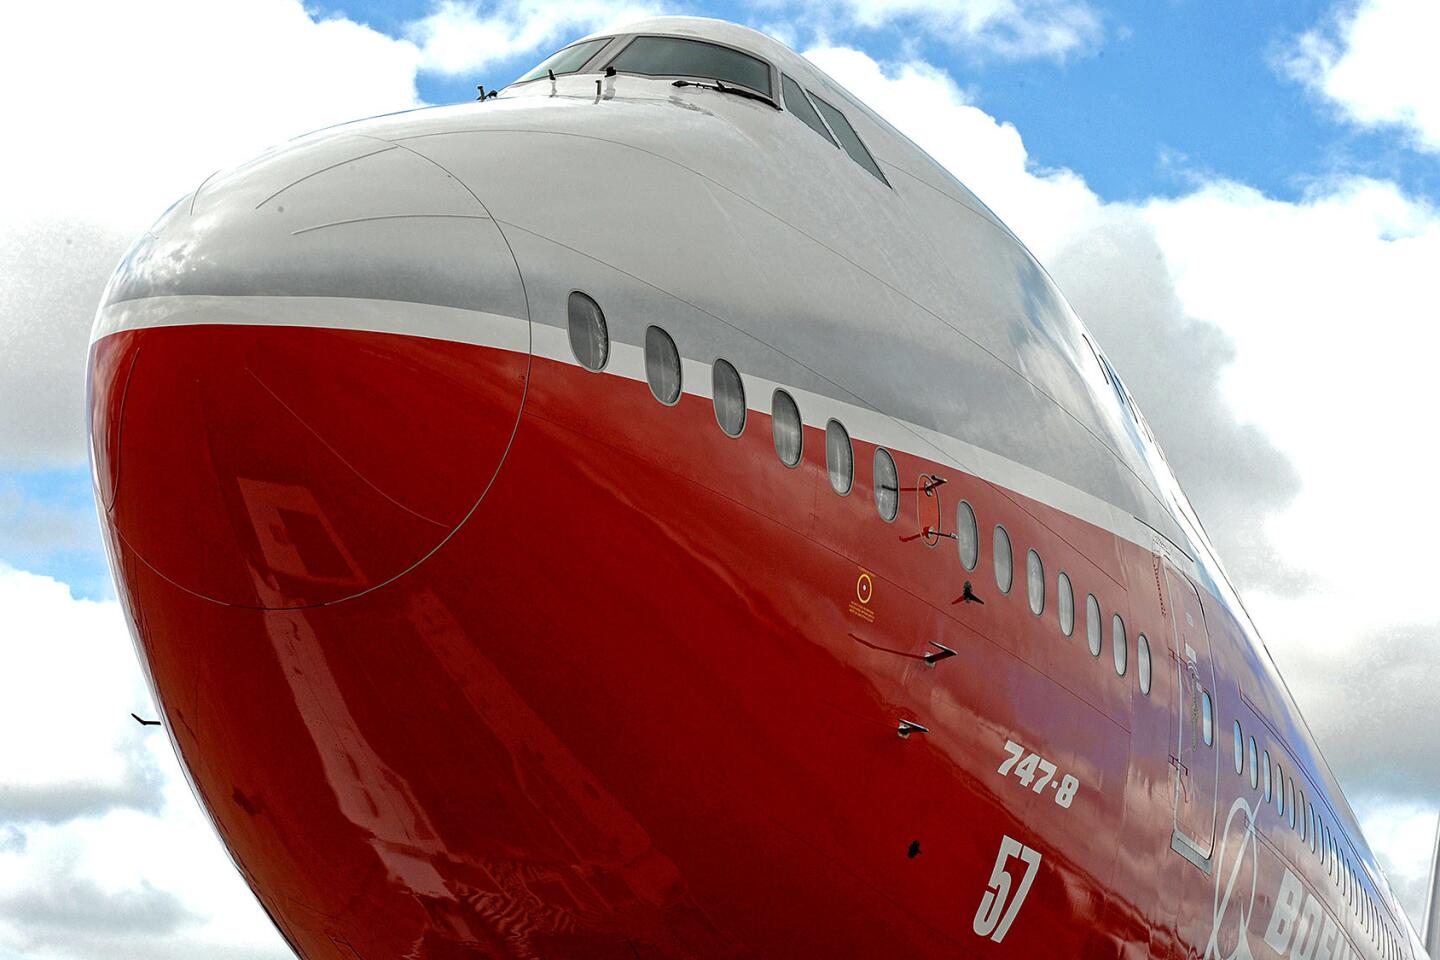 The Boeing 747 | Queen of the skies